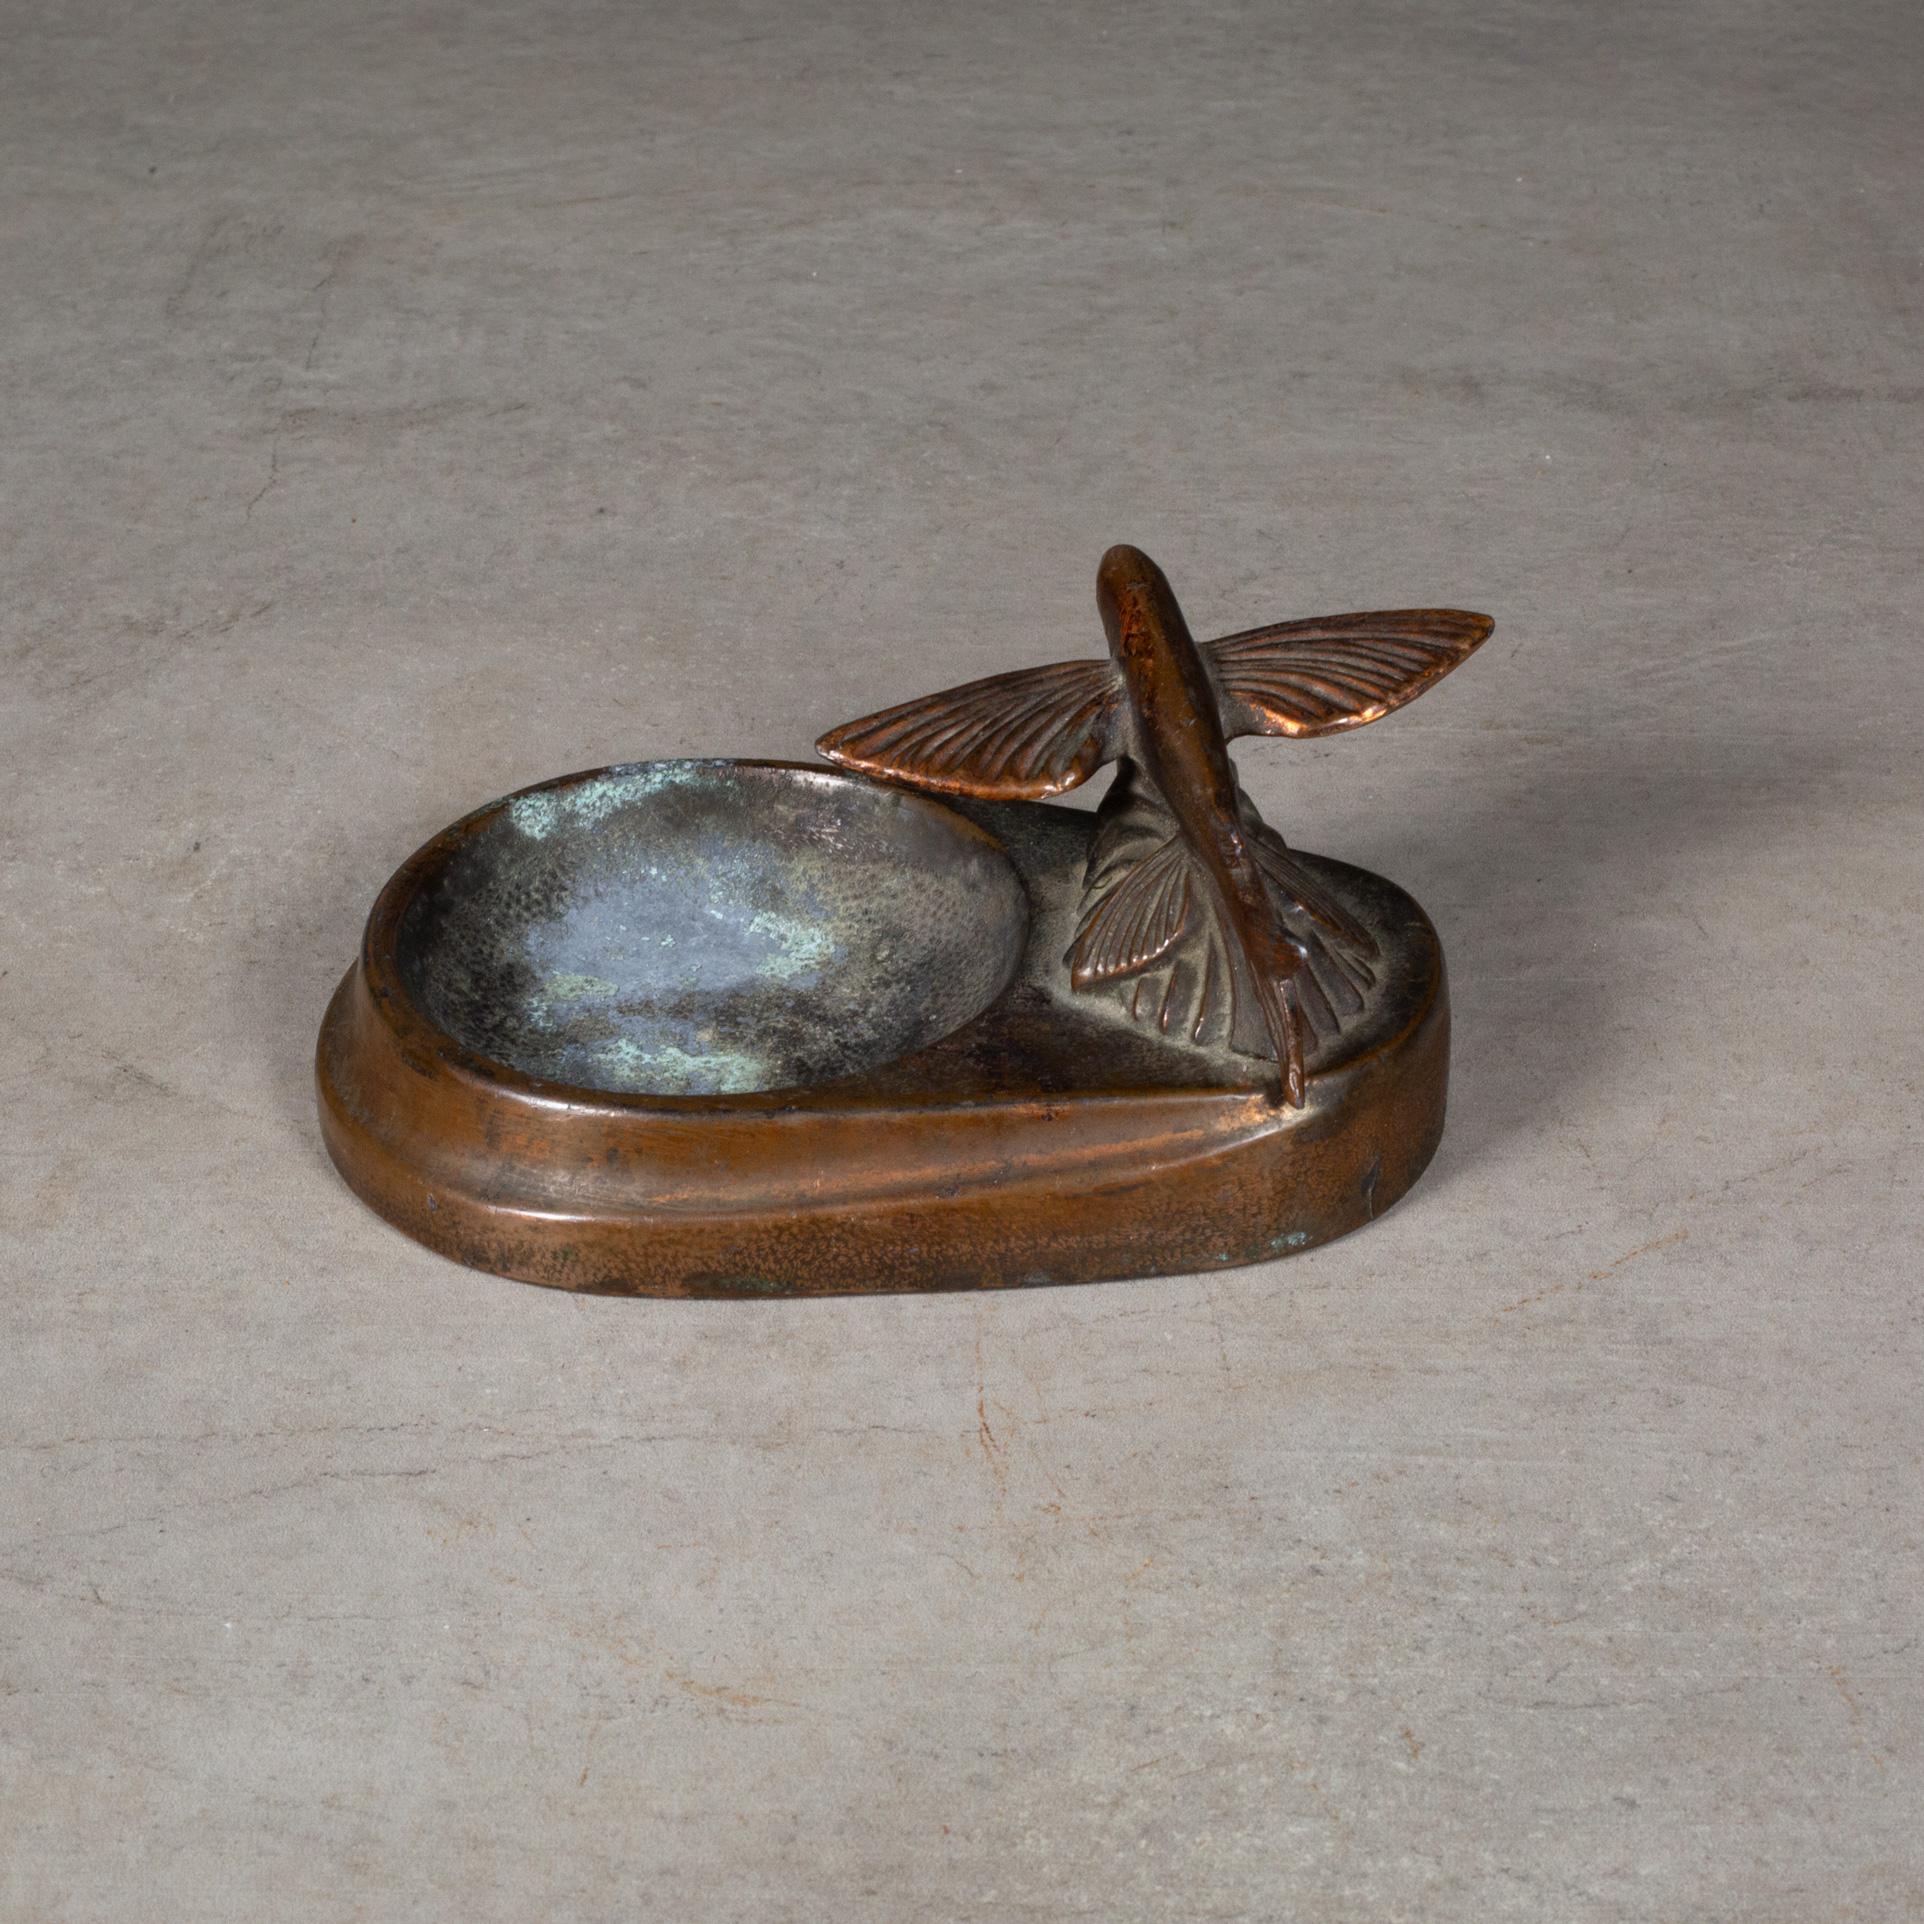 ABOUT

An early 20th century bronze plated Flying Fish coin dish.

    CREATOR Unknown.
    DATE OF MANUFACTURE c.1930-1940.
    MATERIALS AND TECHNIQUES Bronze.
    CONDITION Good. Wear consistent with age and use.
    DIMENSIONS H 2 in. W 5 in. D